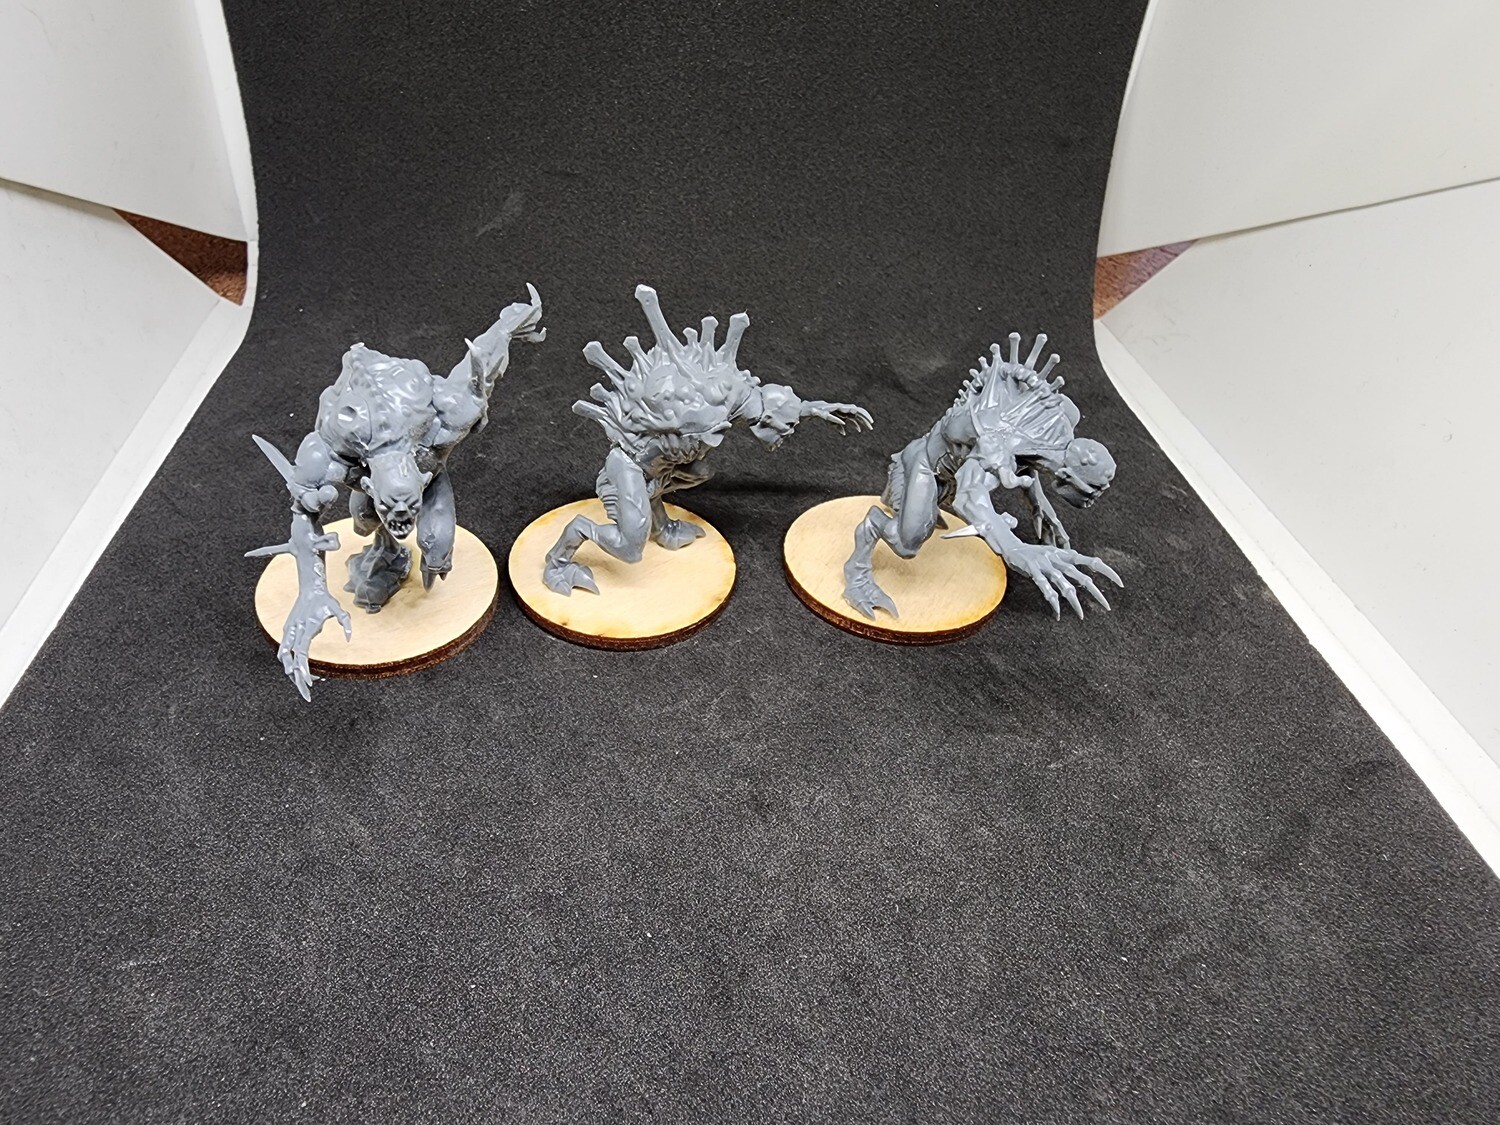 Used Warhammer Vampire Counts Giant Ghouls